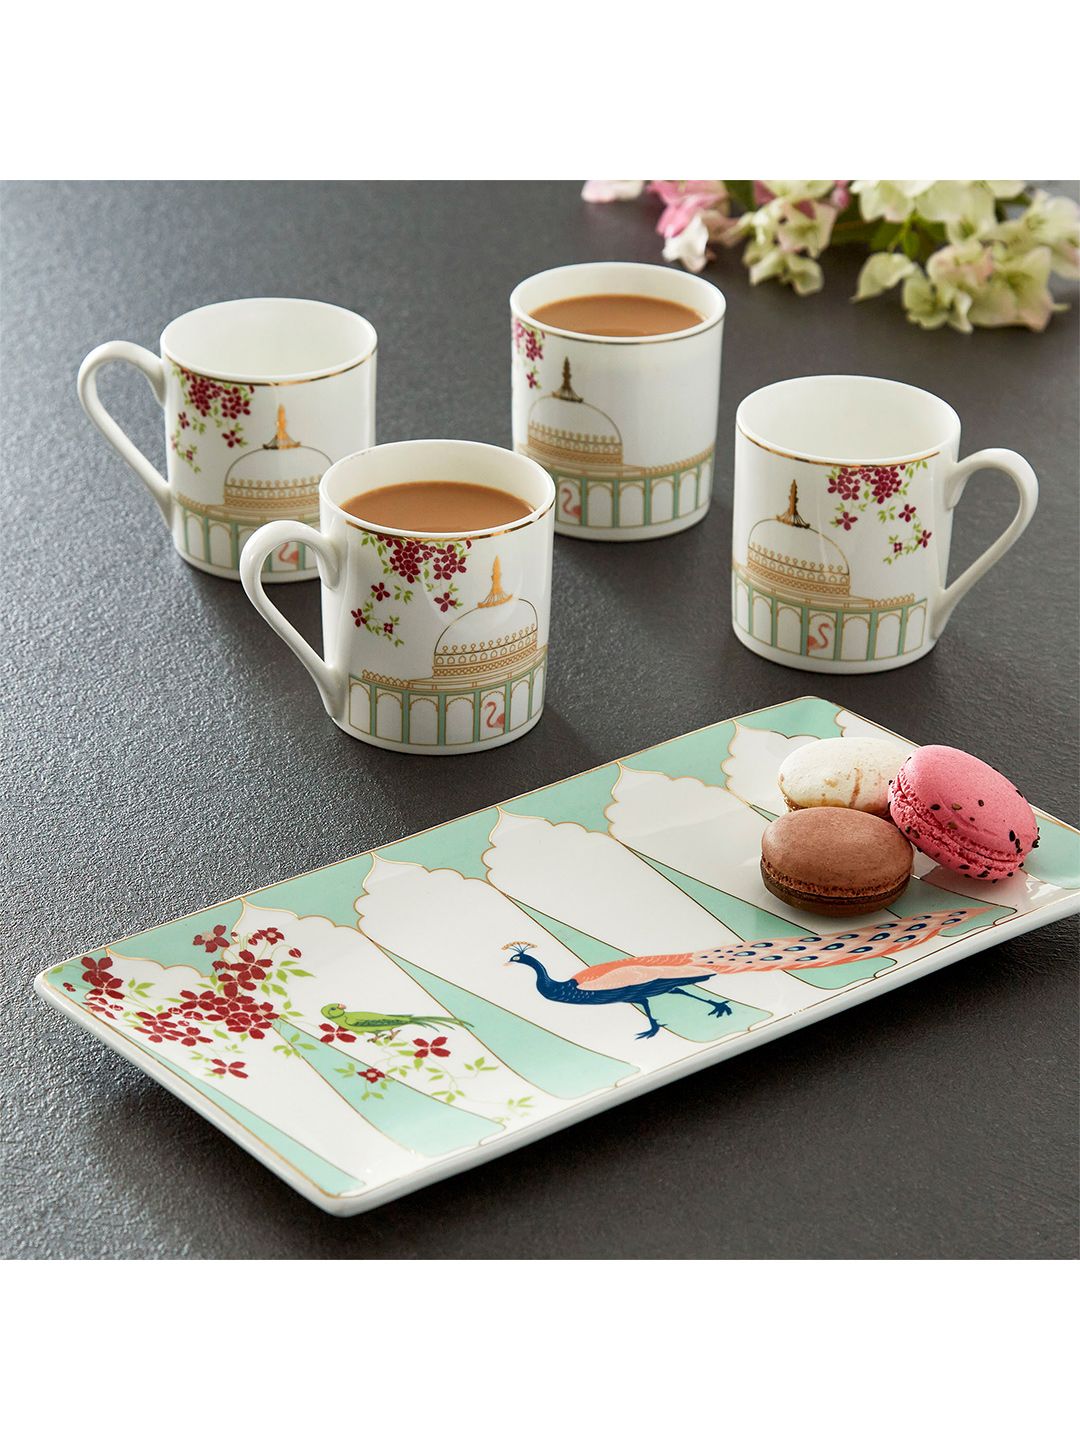 Home Centre Set of 5 Printed Bone China Glossy Mugs and Platter Price in India